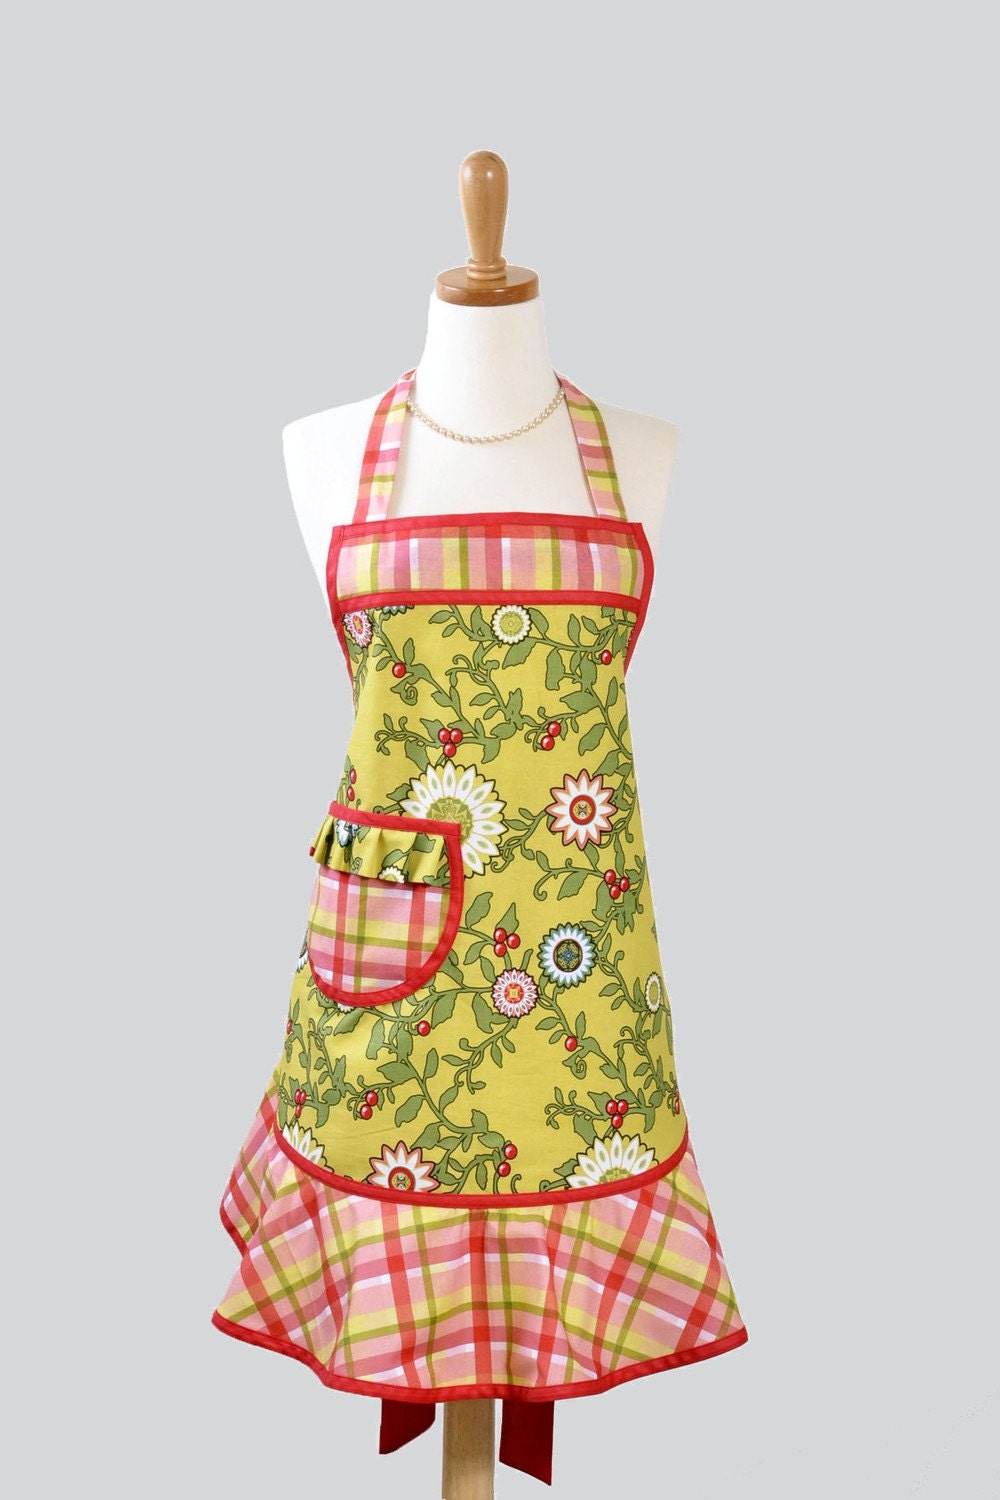 Flounce : Bold Floral Bib Flounce in Summer Orange Yellow and Green with Coordinating Plaid Flounce